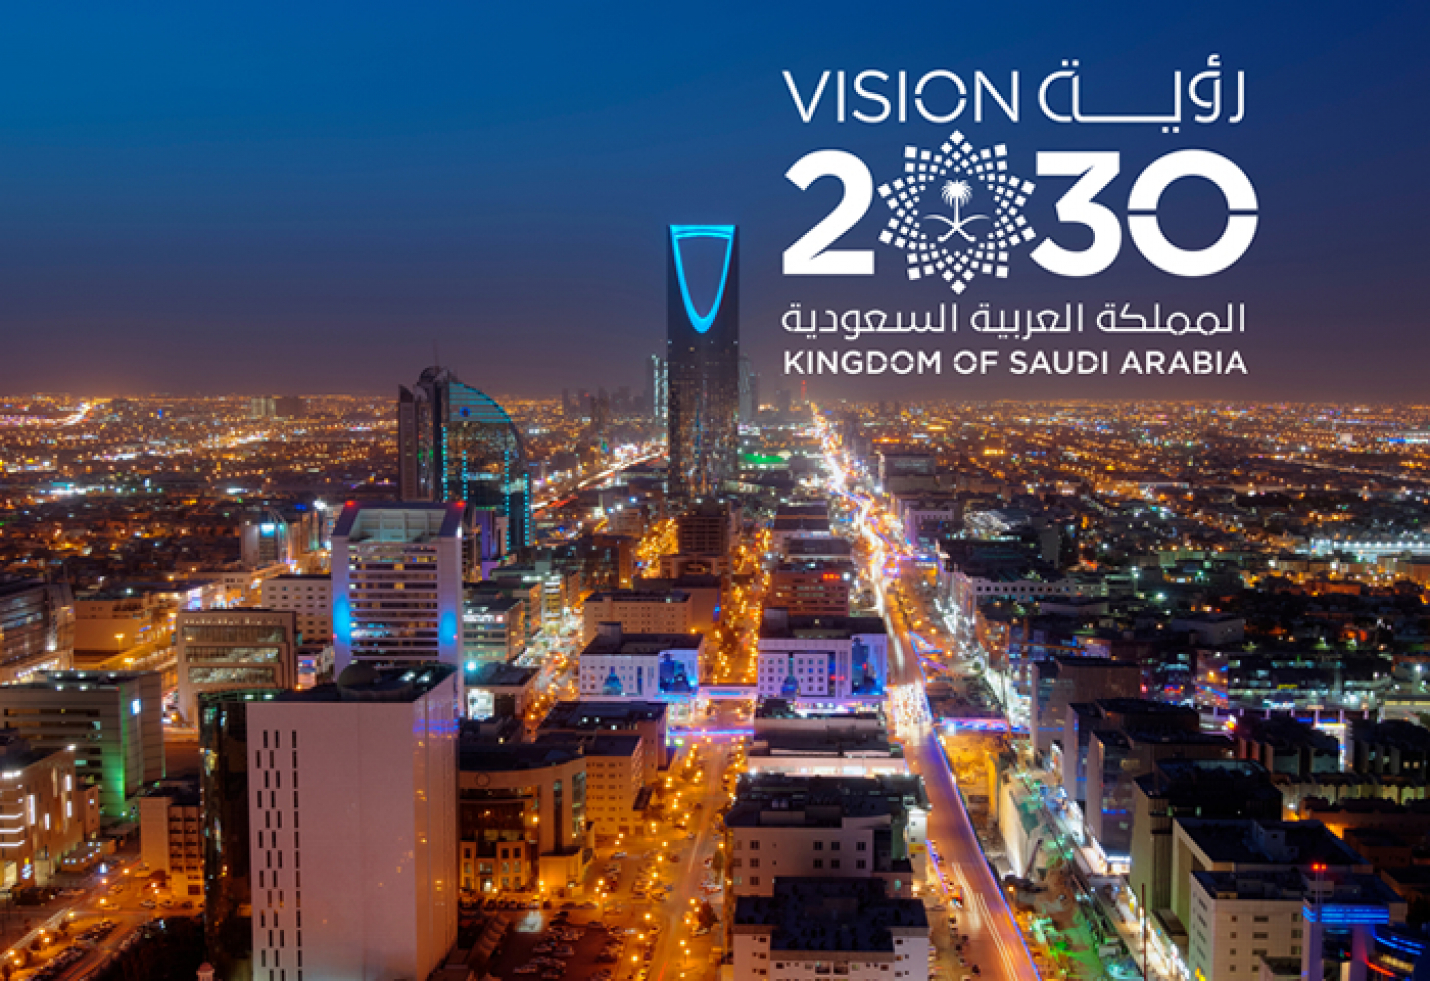 Saudi Arabia focus on climate change is with shift in environment sector to realize Vision 2030